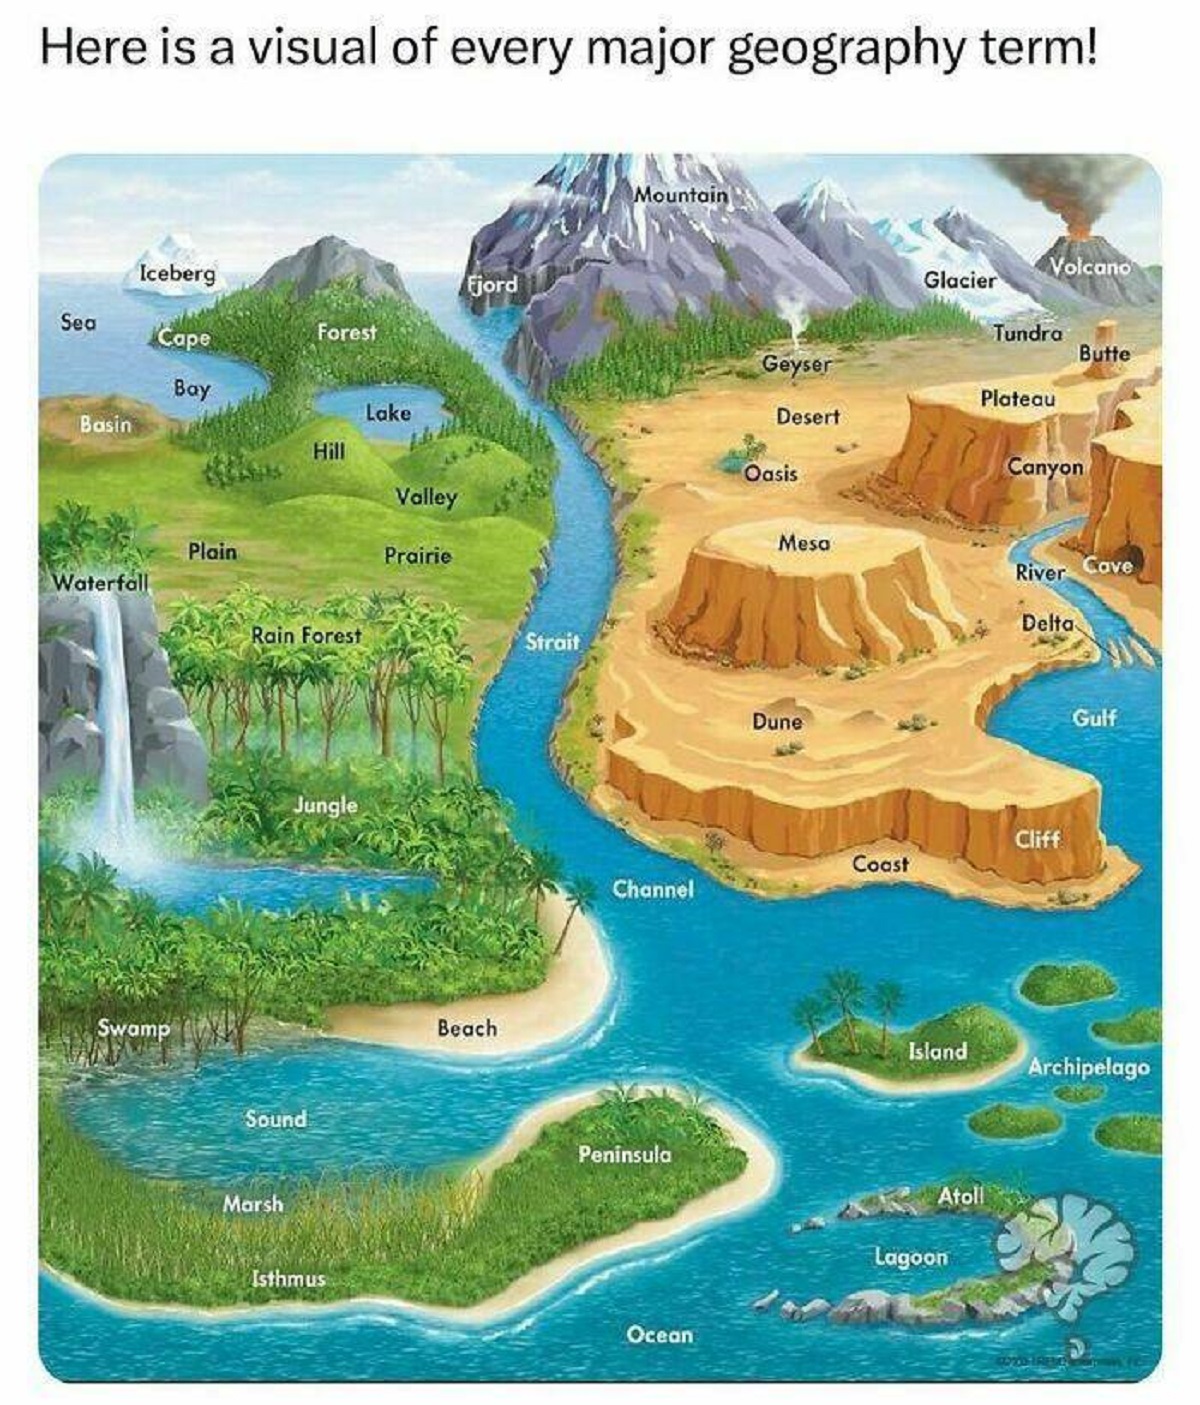 geography terms poster - Here is a visual of every major geography term! Iceberg Fjord 500 Cope Forest Bay Lake Busin Hall Valley Plain Waterfall Prairie Swamp Rain Forest Jungle Sound Marsh Beach Stroit Mountoin Volcano Glacier Tundra Butte Geyser Platea